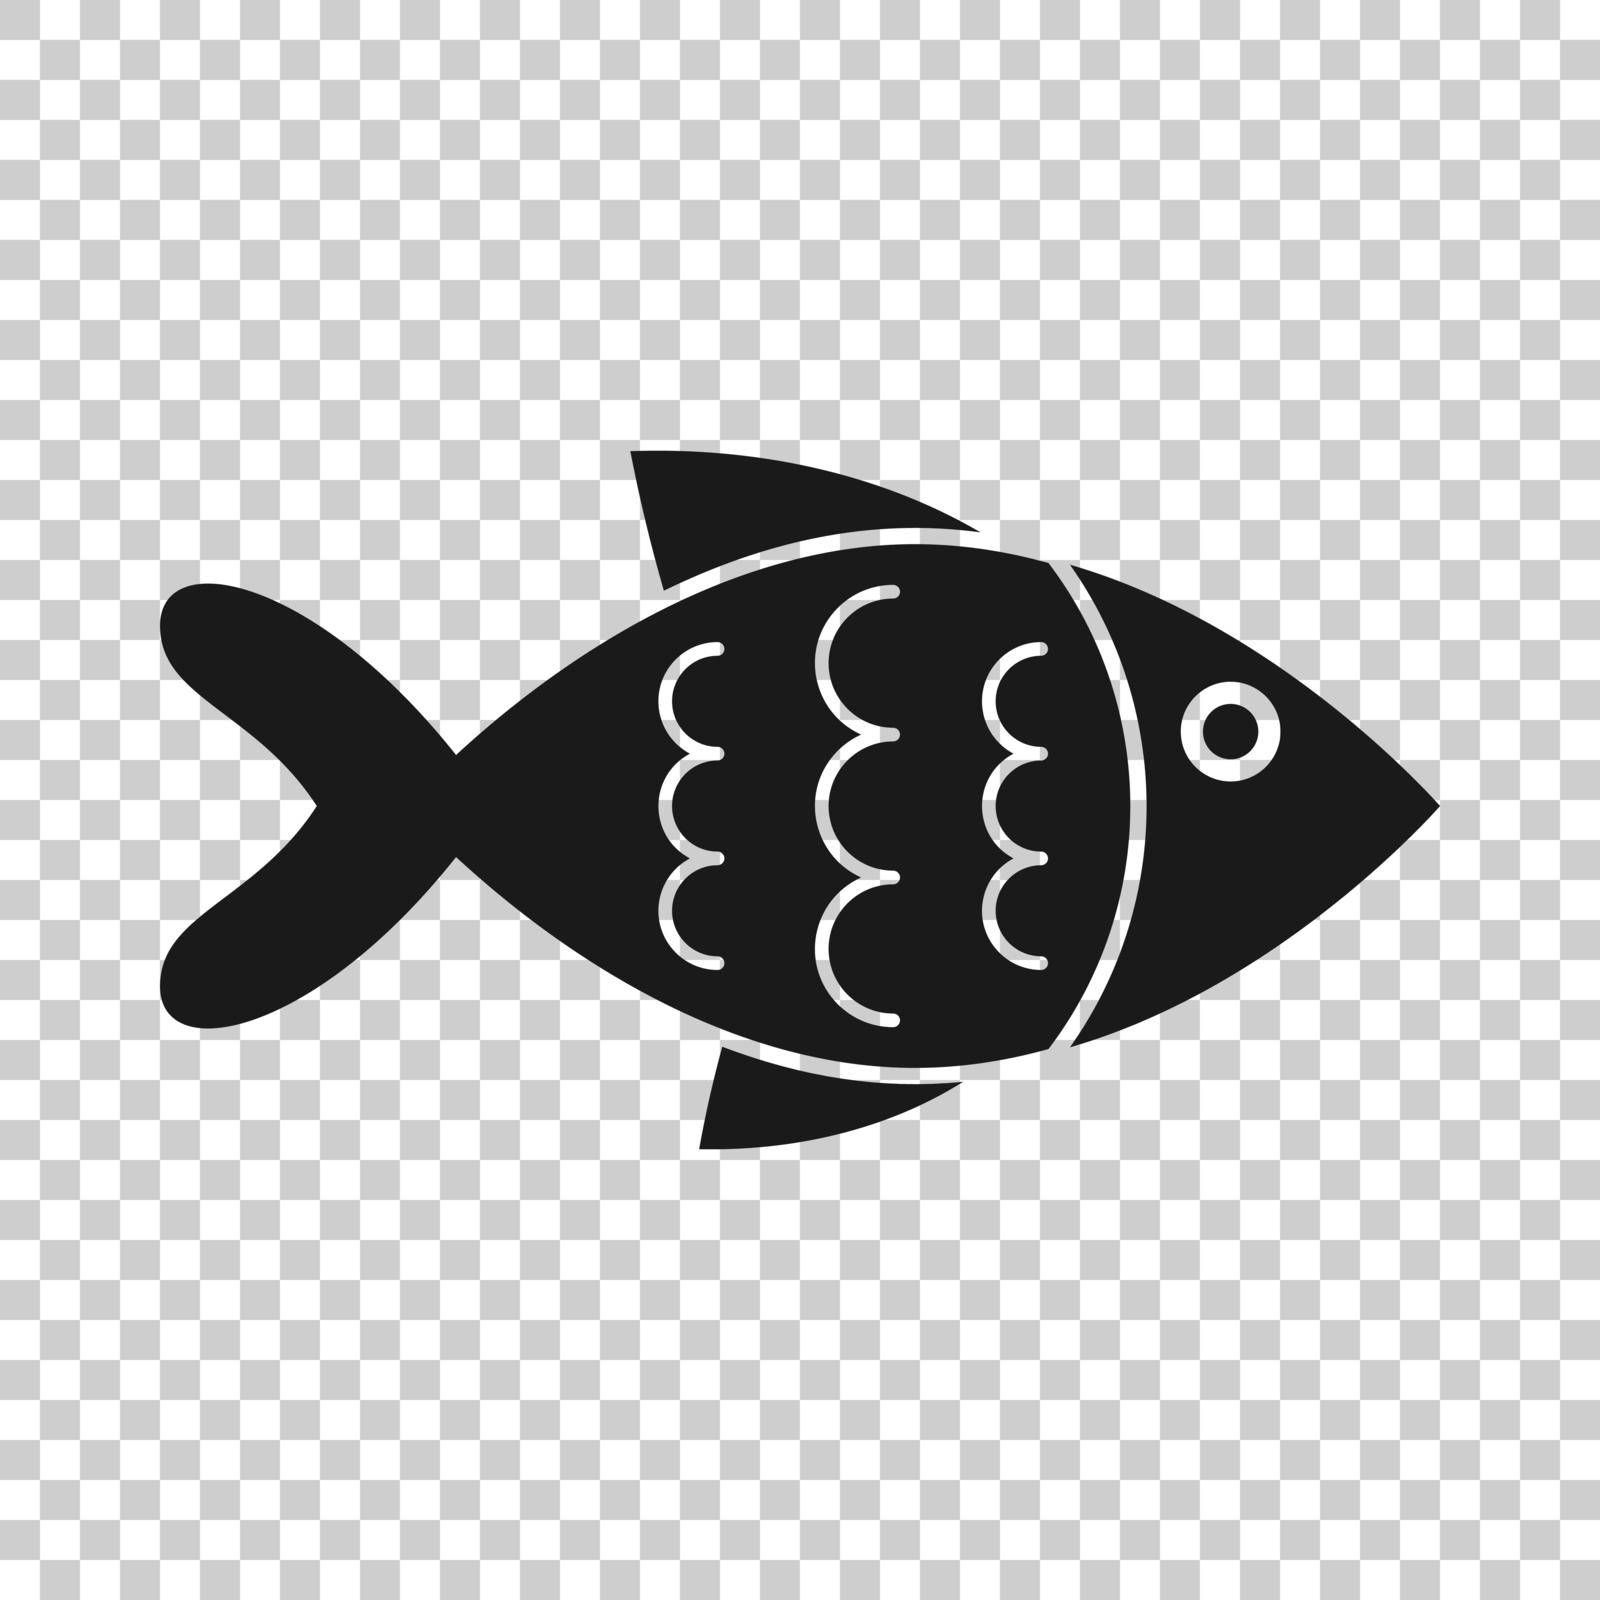 Fish sign icon in transparent style. Goldfish vector illustration on isolated background. Seafood business concept. by LysenkoA